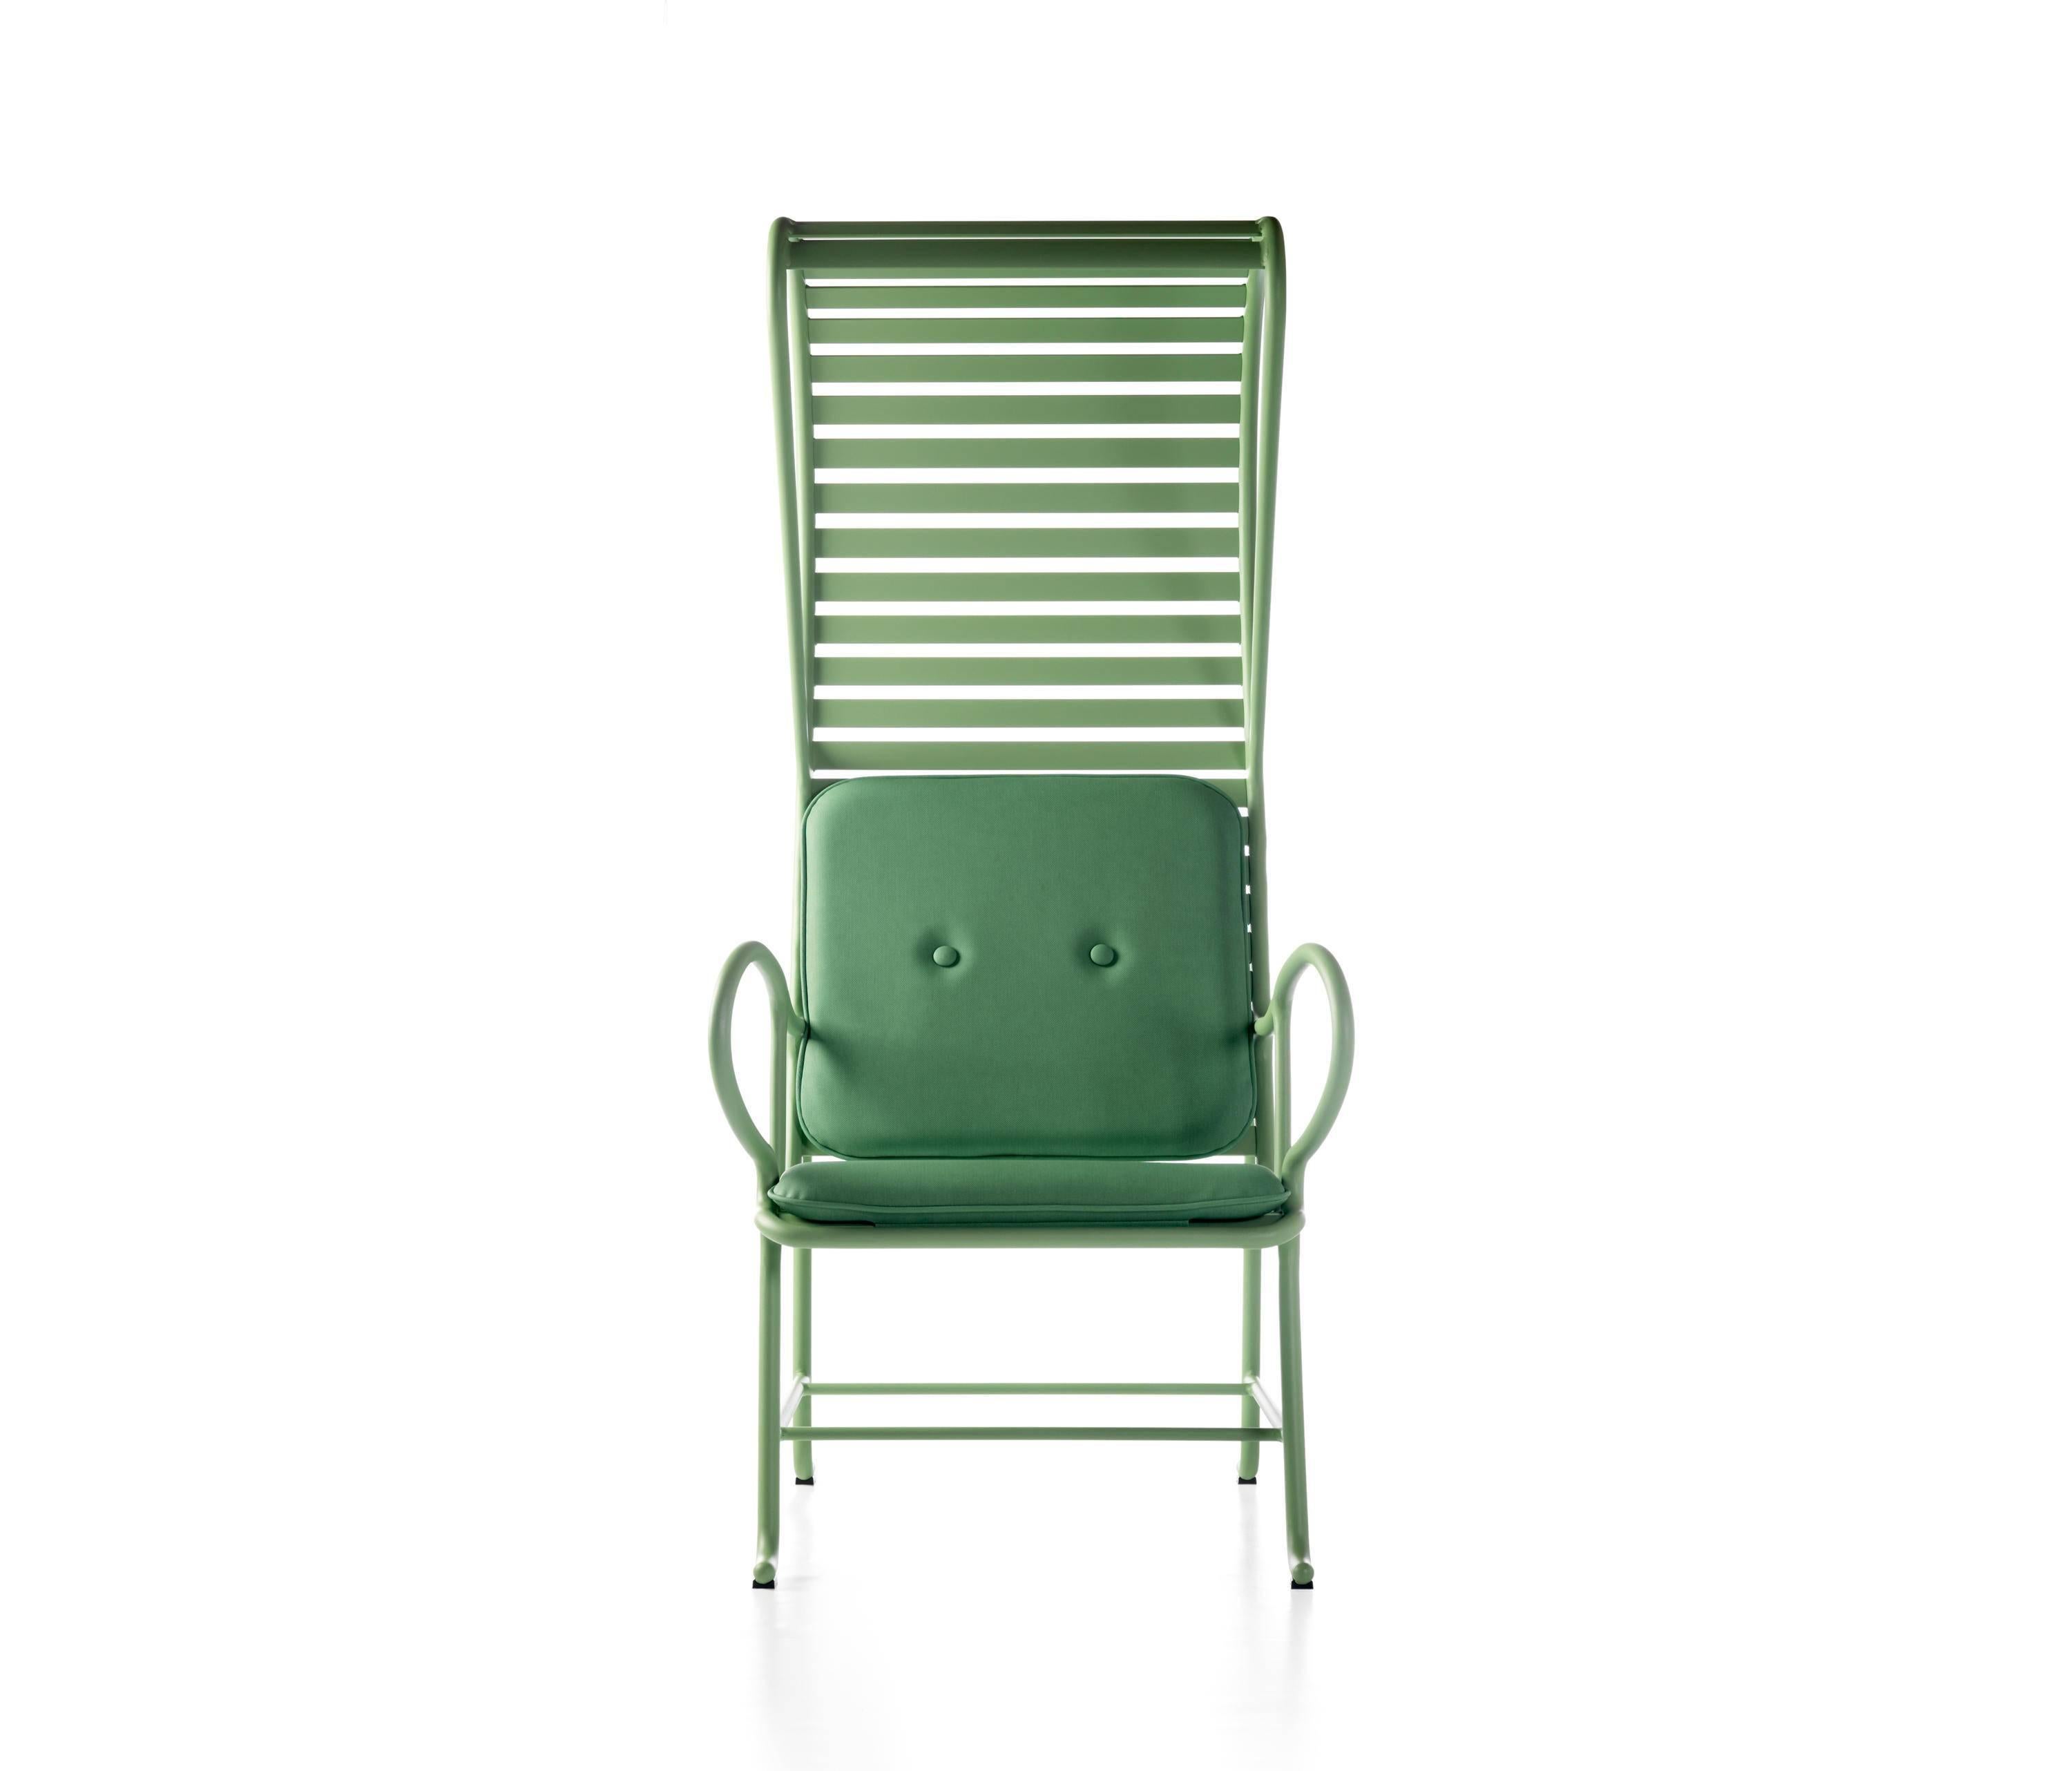 The gardenia outdoor collection by Jaime Hayon is composed of an armchair, bench and armchair with pergola. Structures are made of cast and extruded aluminium. Powder-coated white (RAL 9001), green (RAL 6021) or grey (RAL 7015) with Alesta by